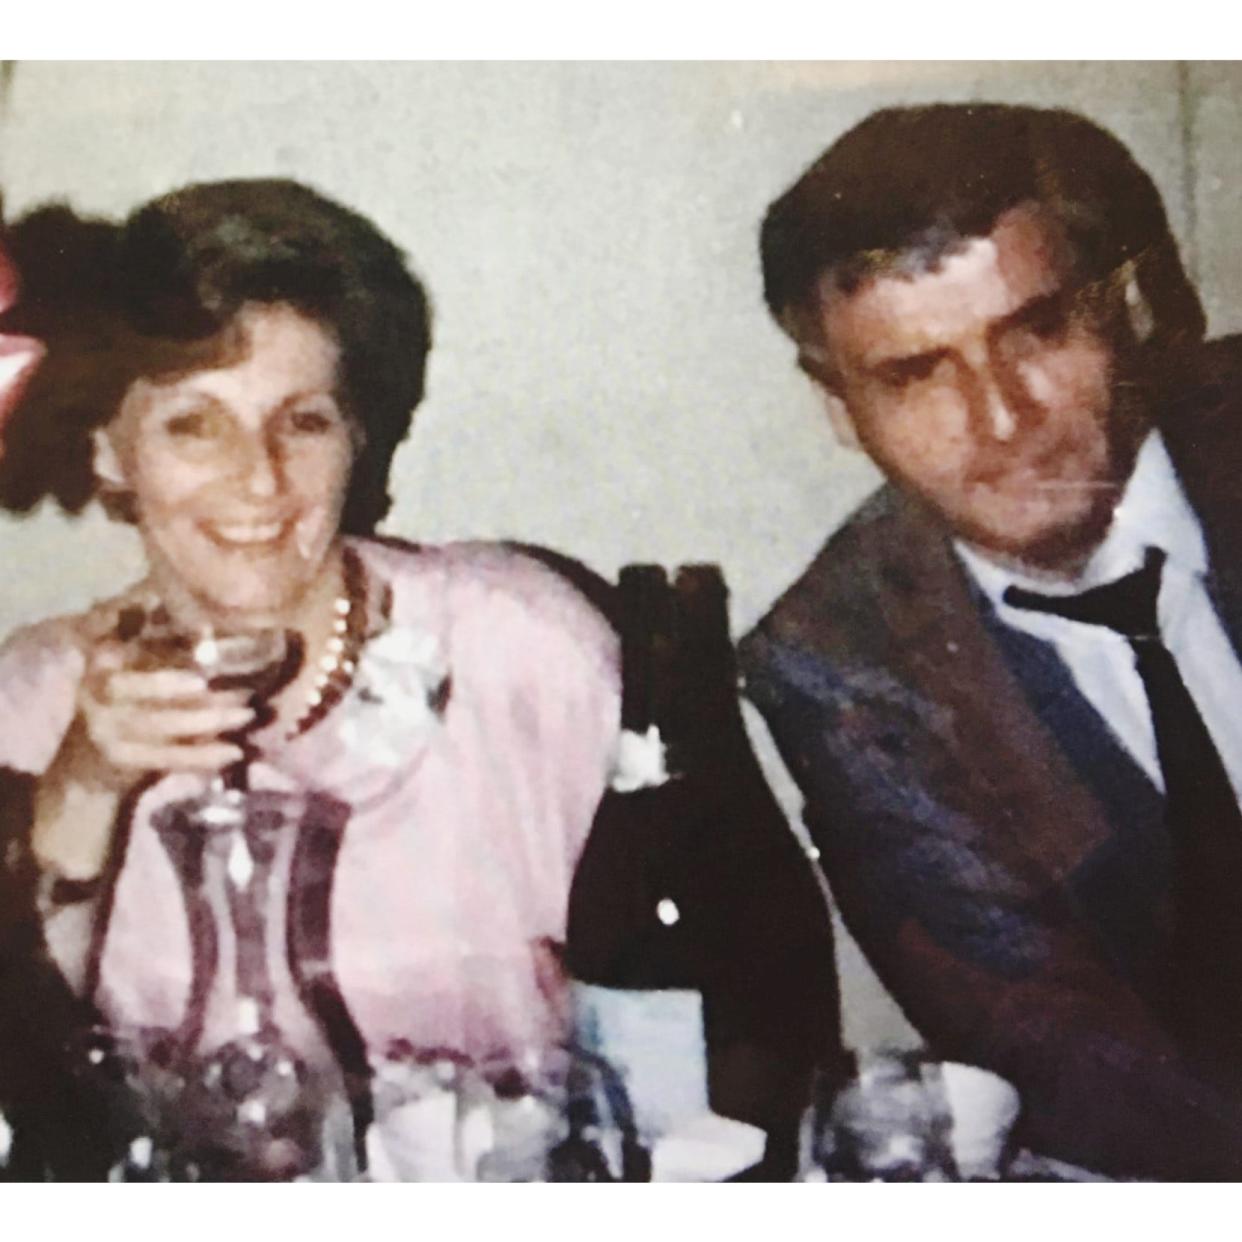 Becky Bodnar and Robert Rigaux in an undated photo.